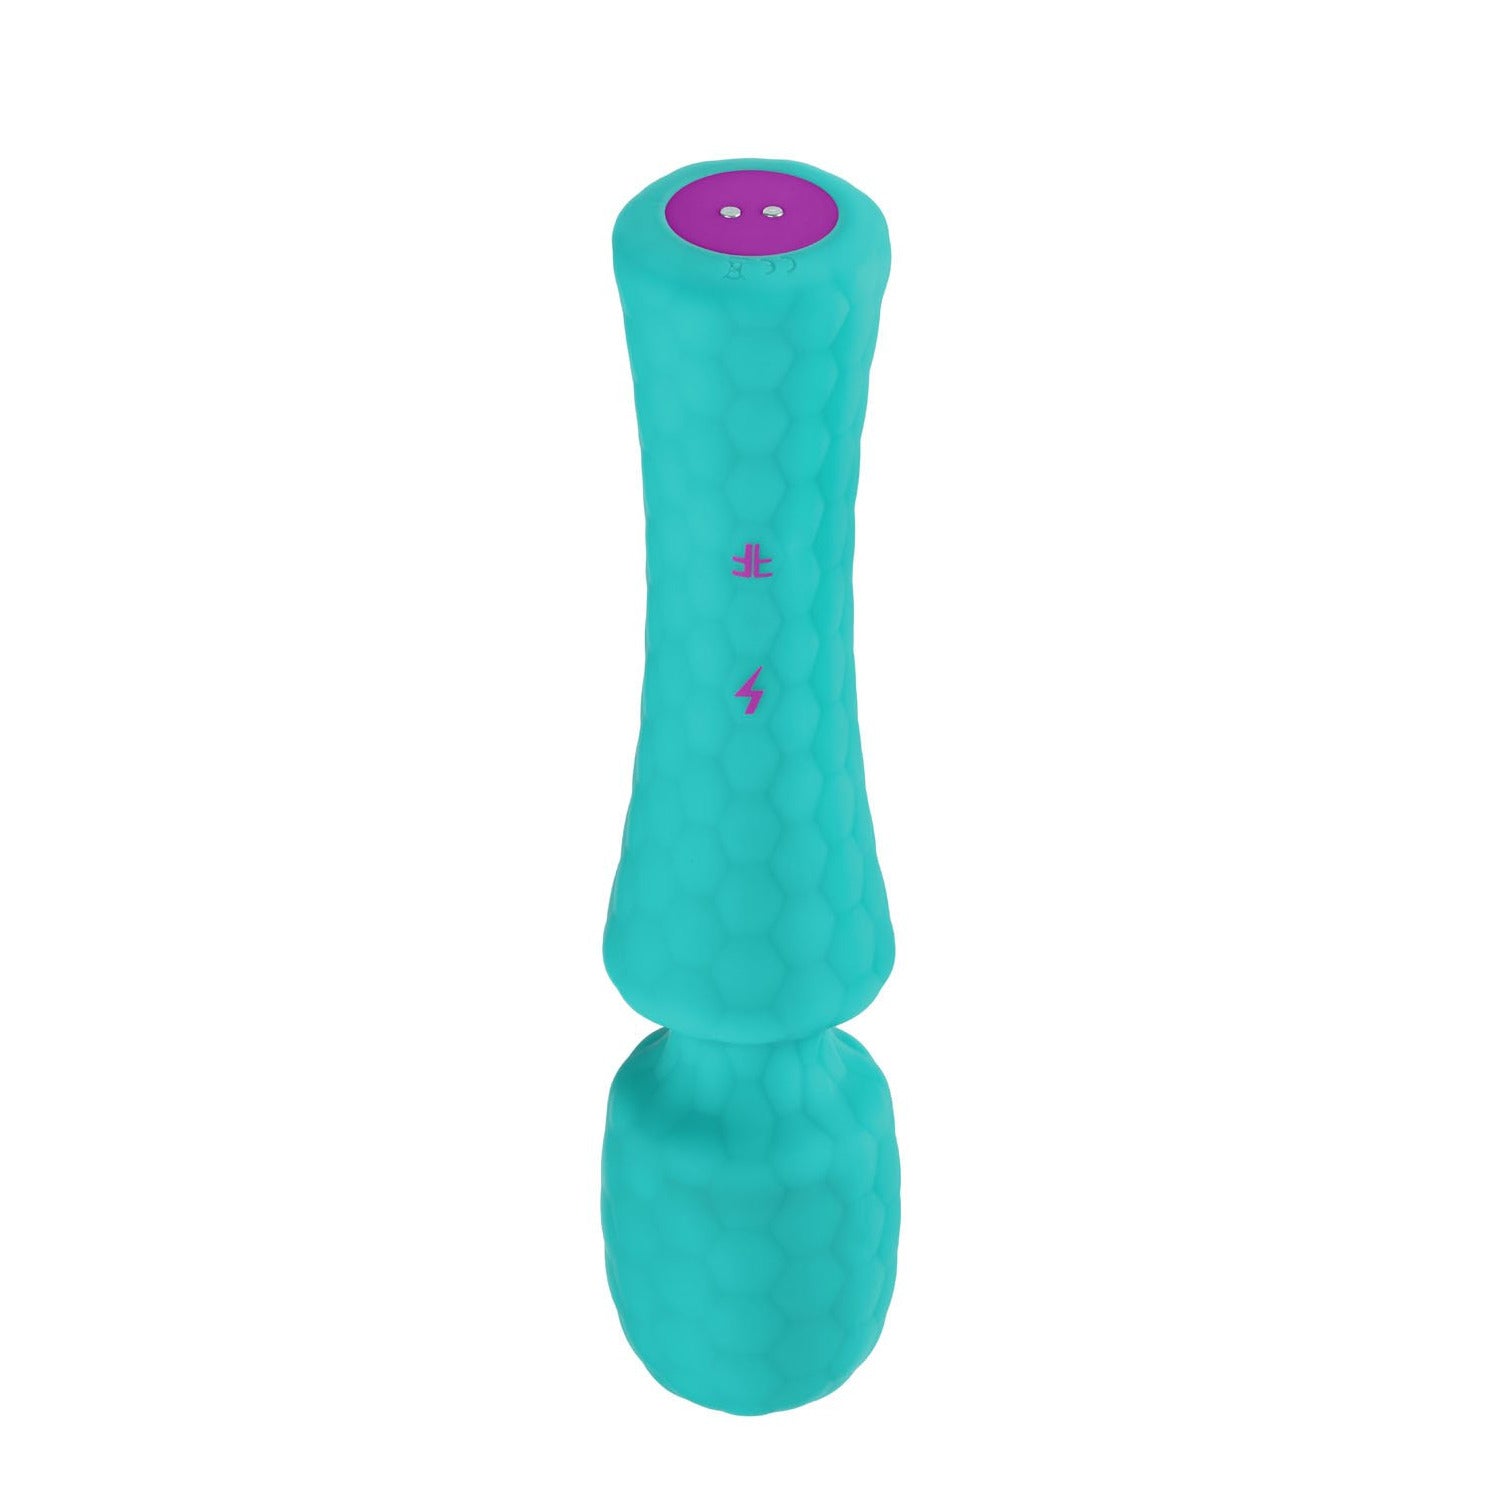 Ultra Wand in turquoise - Femme Funn - by The Bigger O - an online sex toy shop. We ship to USA, Canada and the UK.